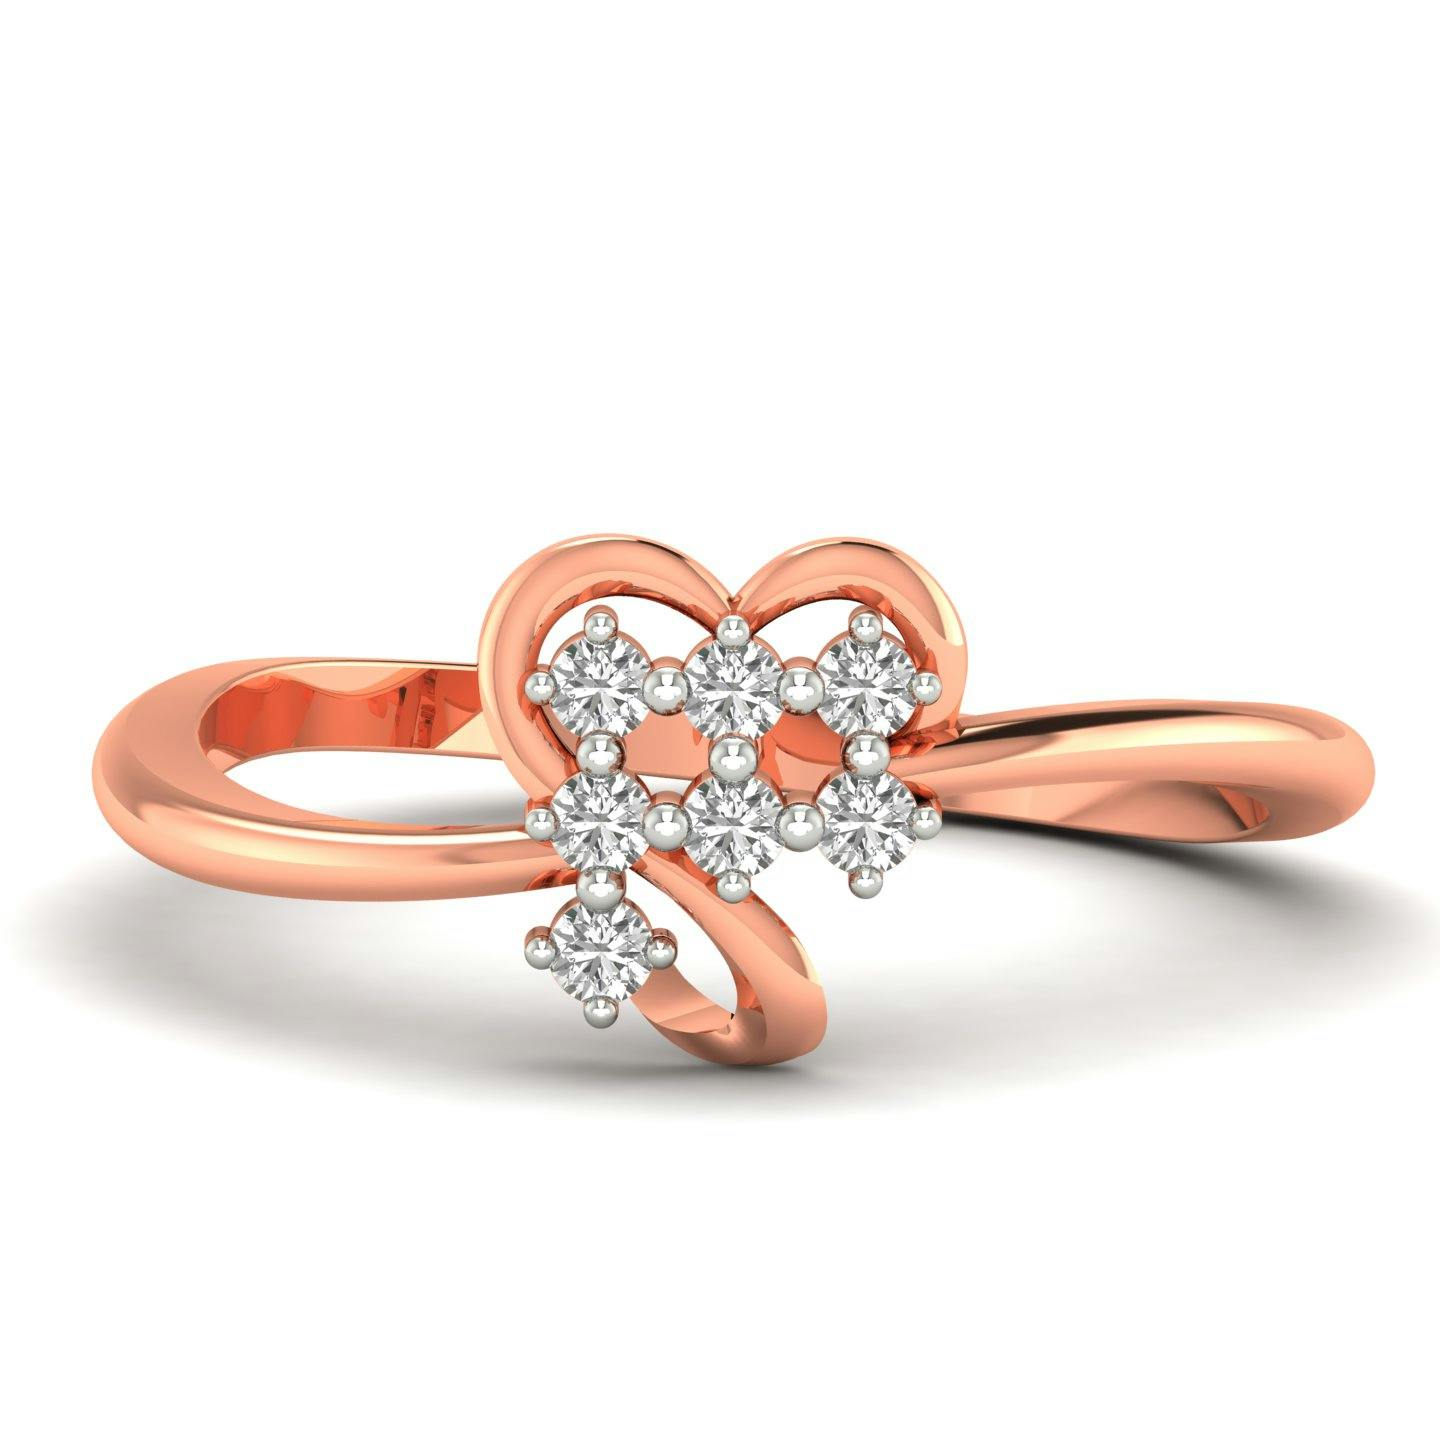 Affectionate love ring